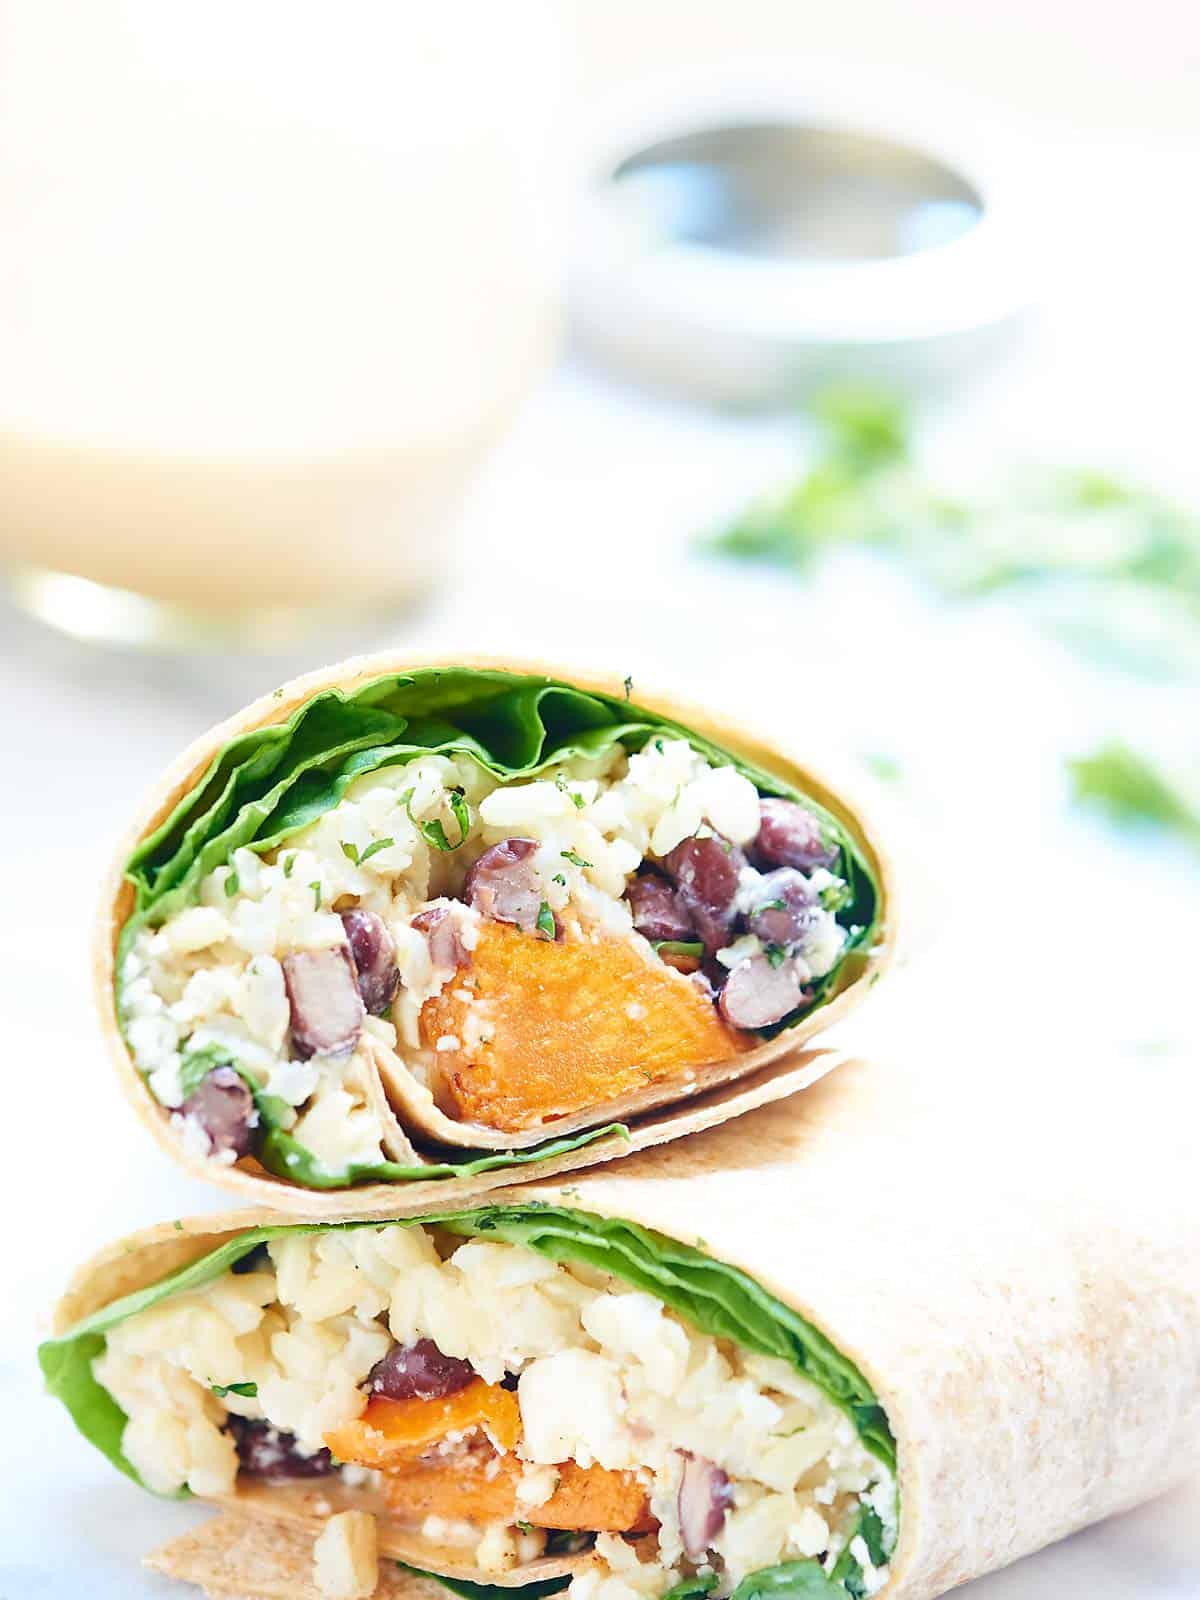 This healthy sweet potato wrap is hearty, vegetarian & full of good for you ingredients like black beans, brown rice & is drizzled in a unique tahini sauce! showmetheyummy.com #wrap #vegetarian